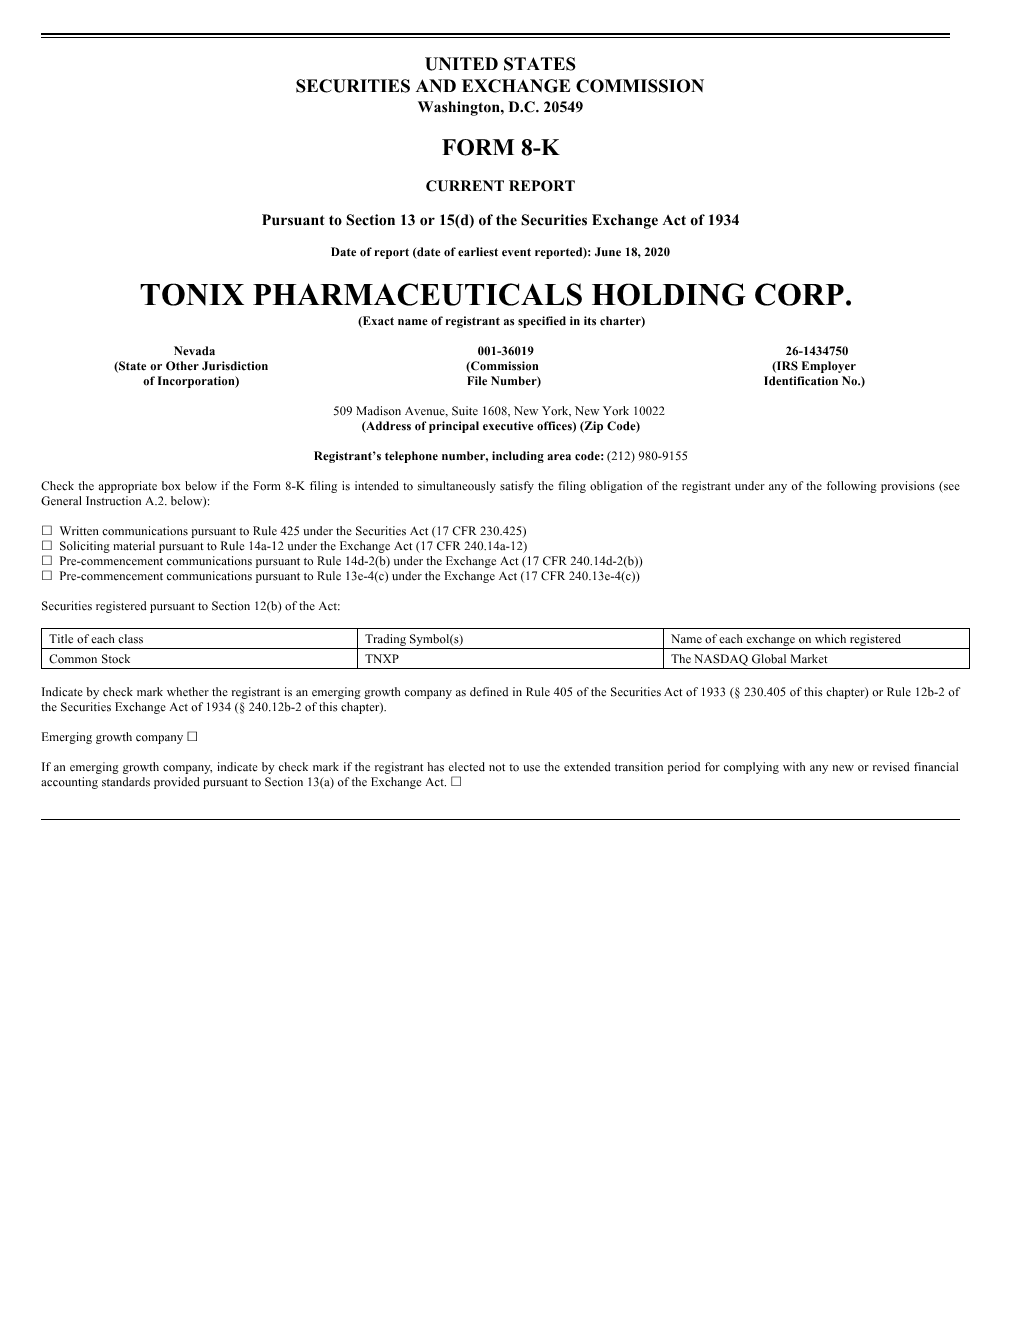 TONIX PHARMACEUTICALS HOLDING CORP. (Exact Name of Registrant As Specified in Its Charter)